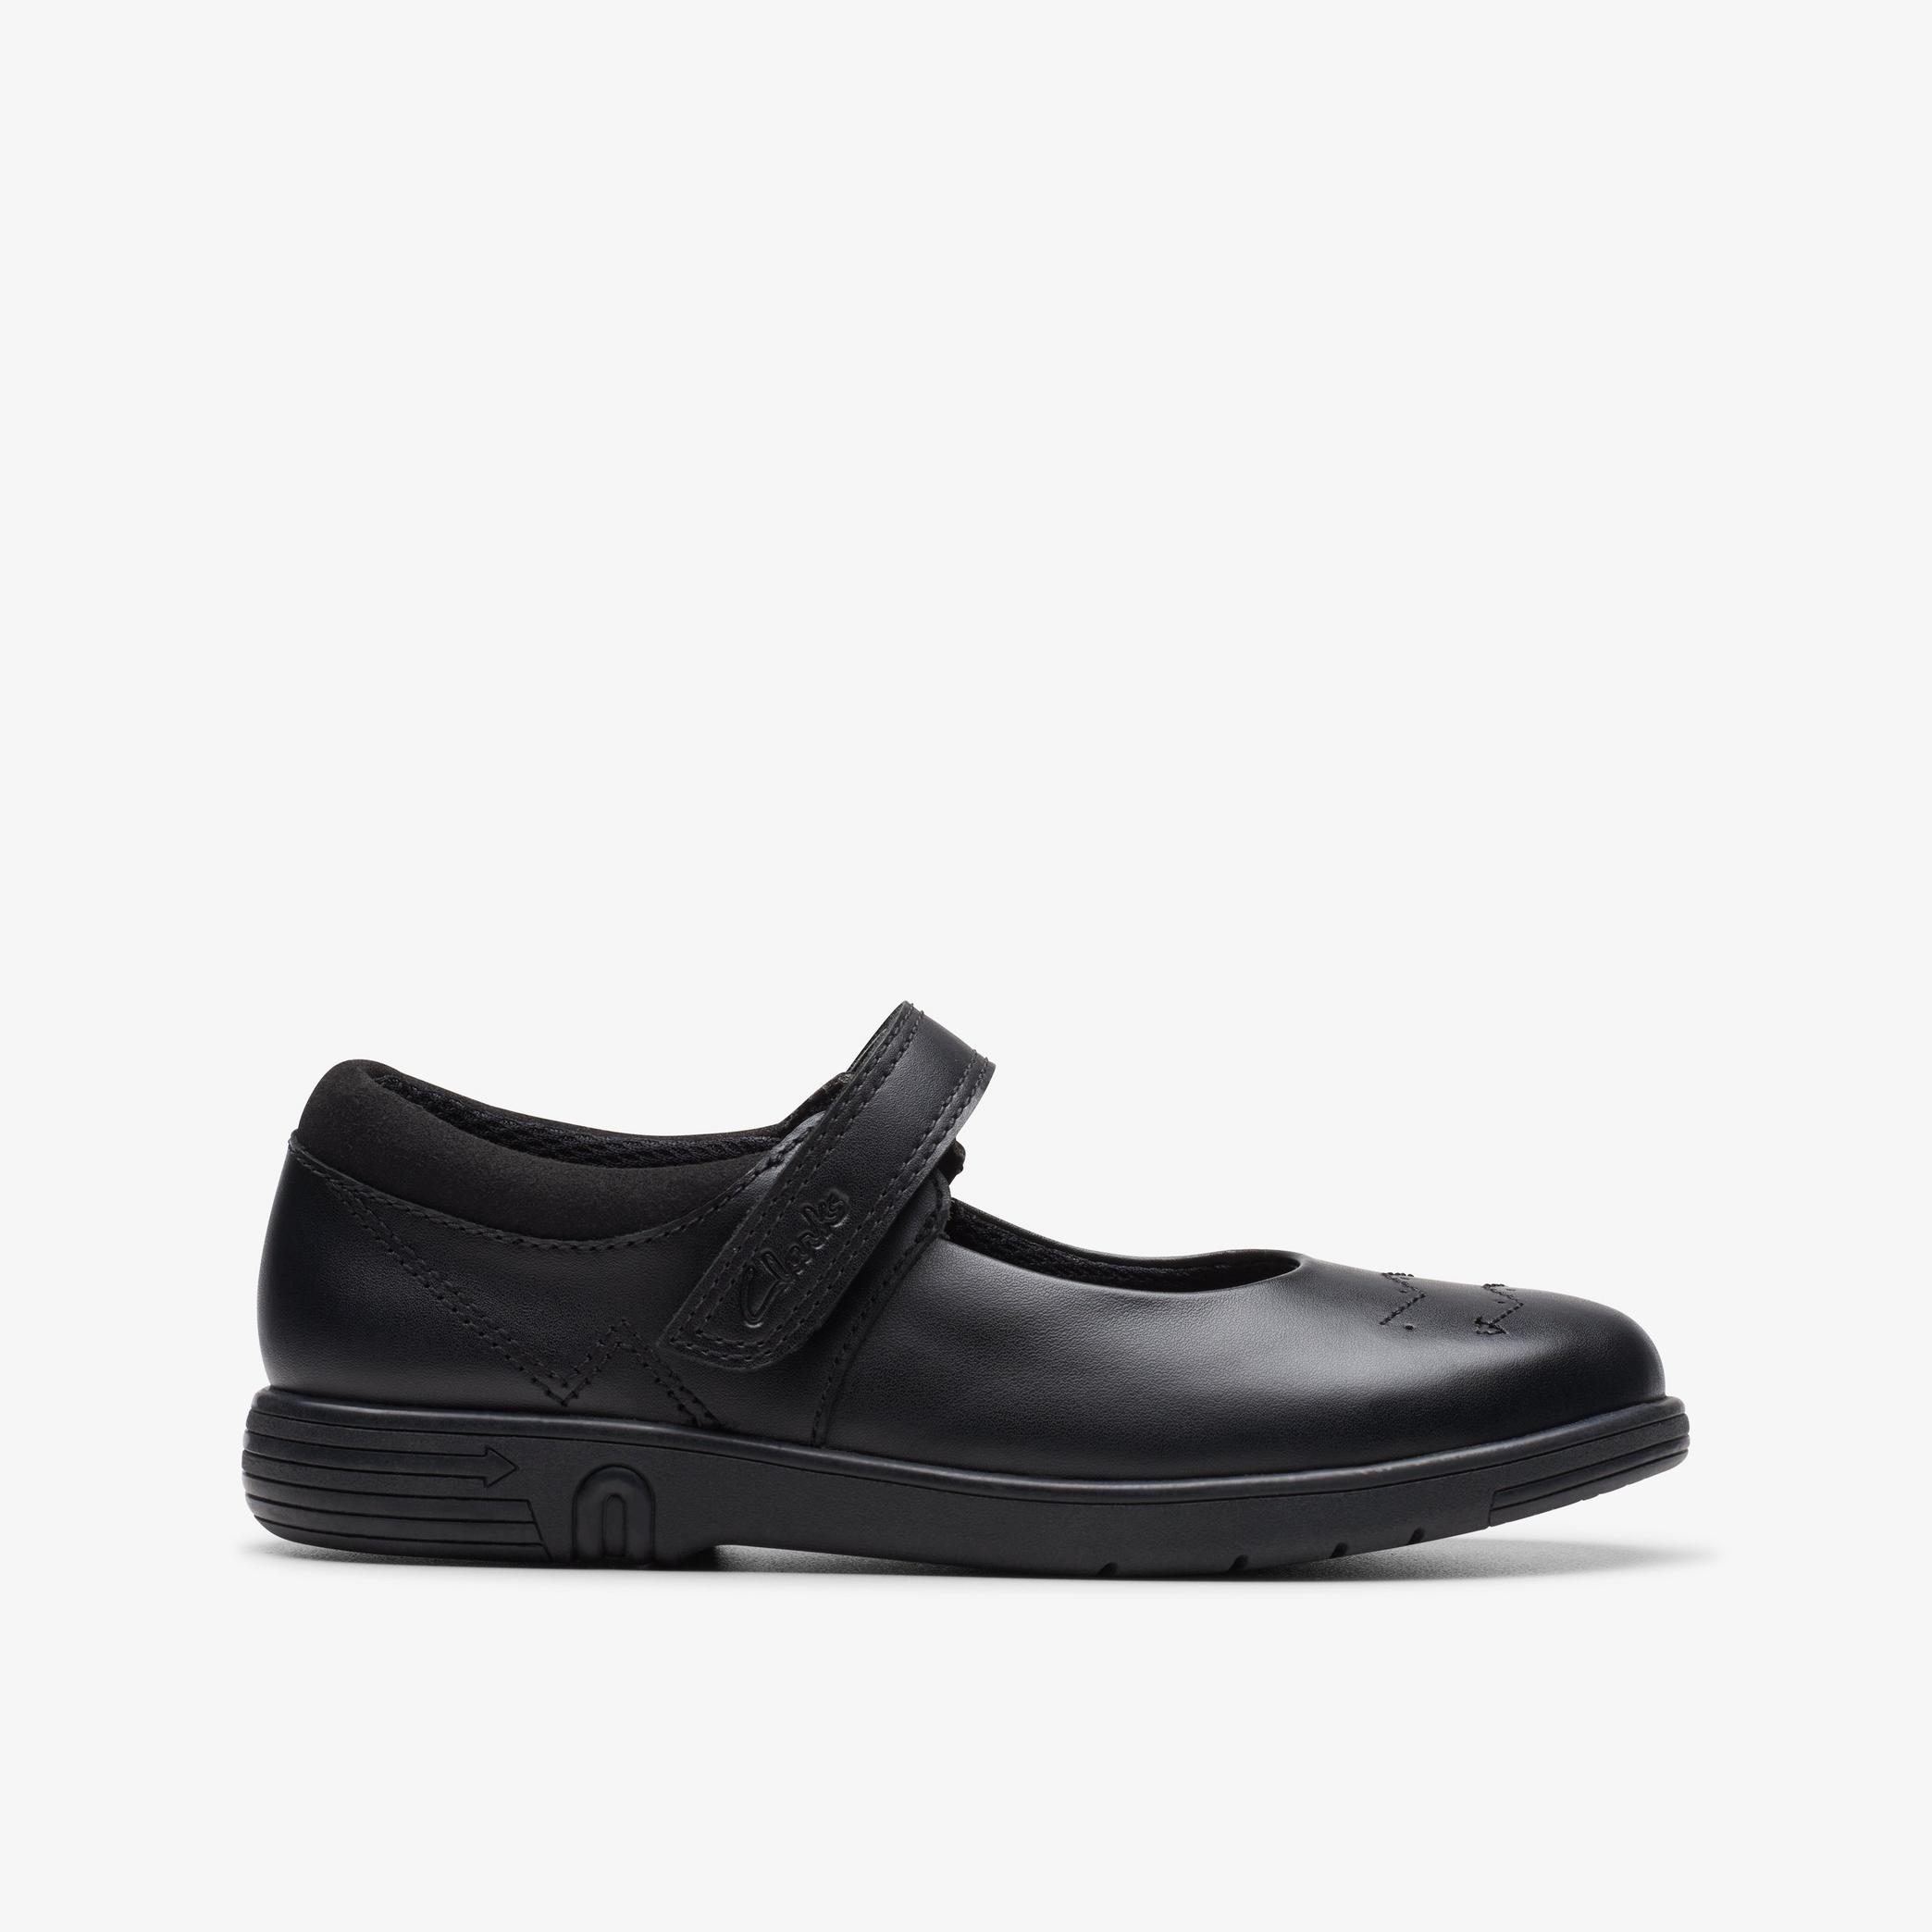 Jazzy Jig Kid Black Leather Shoes, view 1 of 6